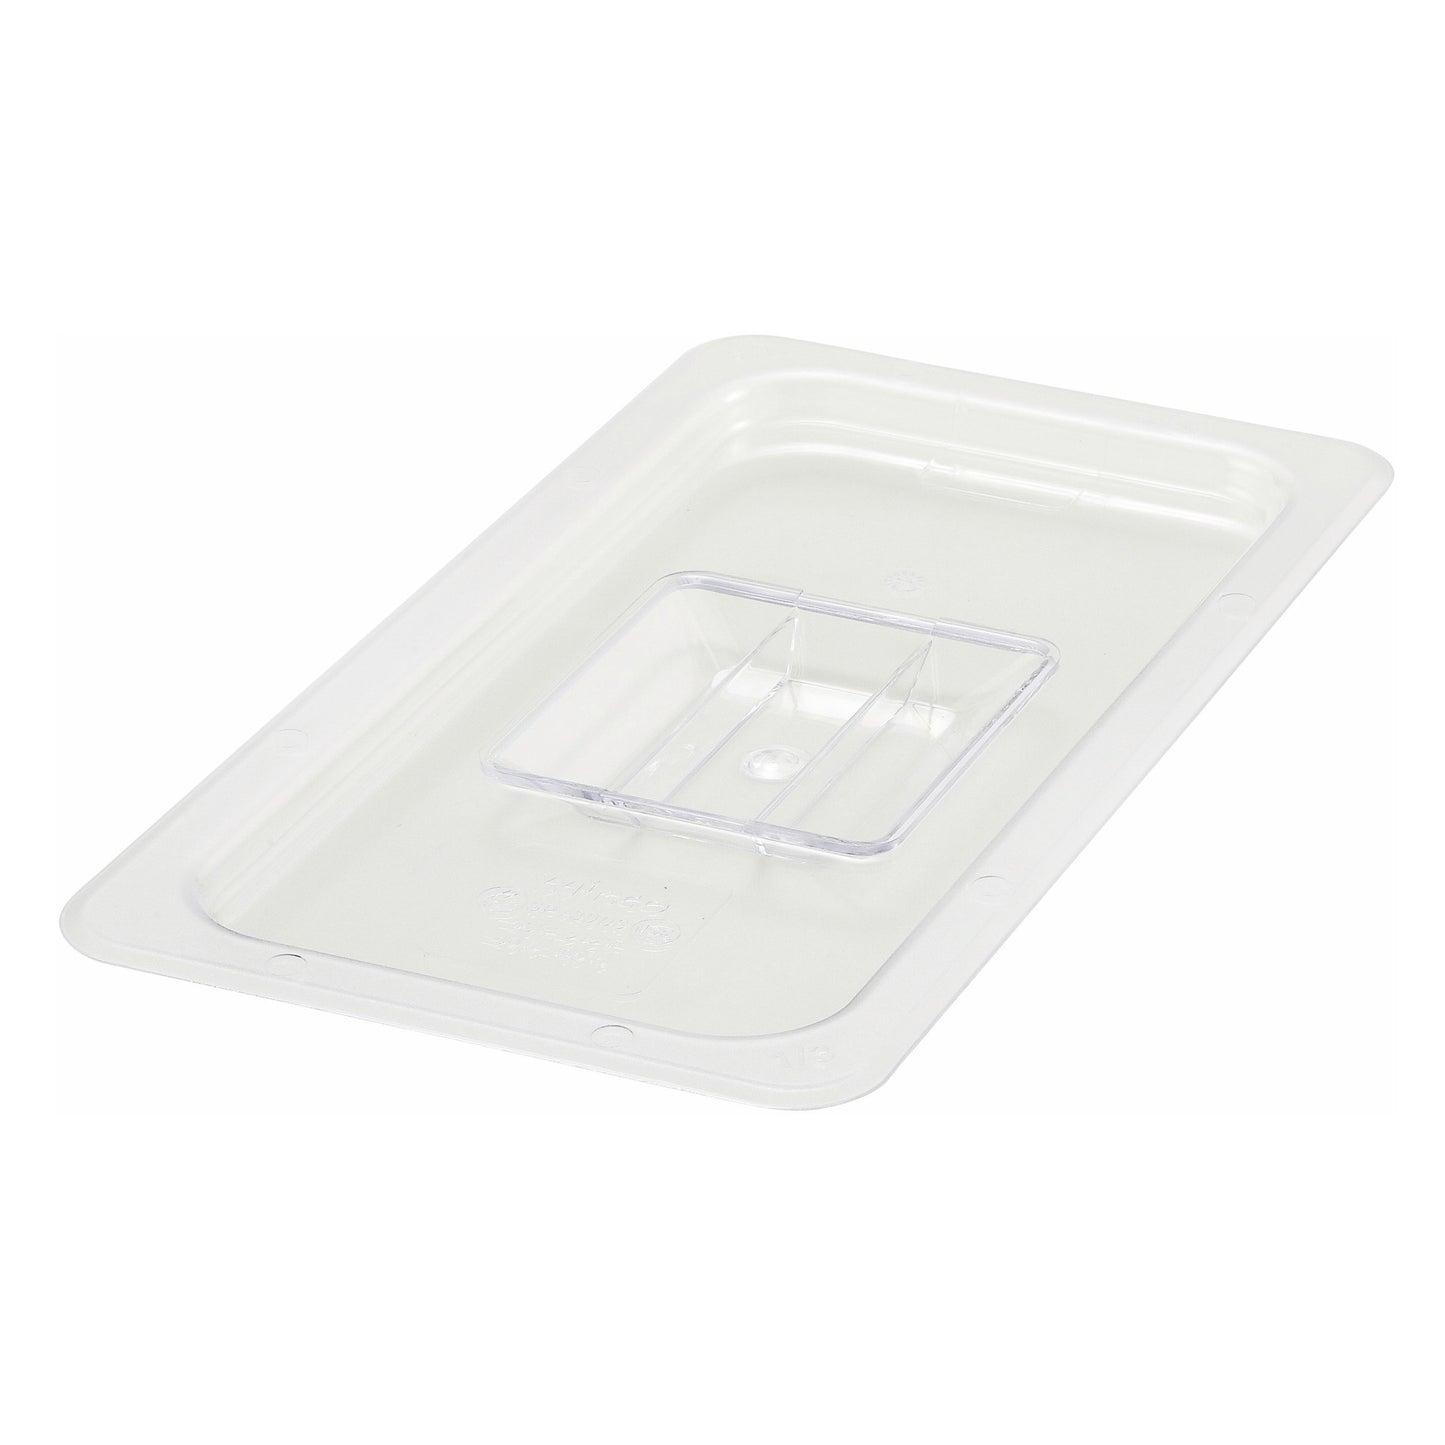 SP7300S - Polycarbonate Food Pan Cover, Solid - Third (1/3)